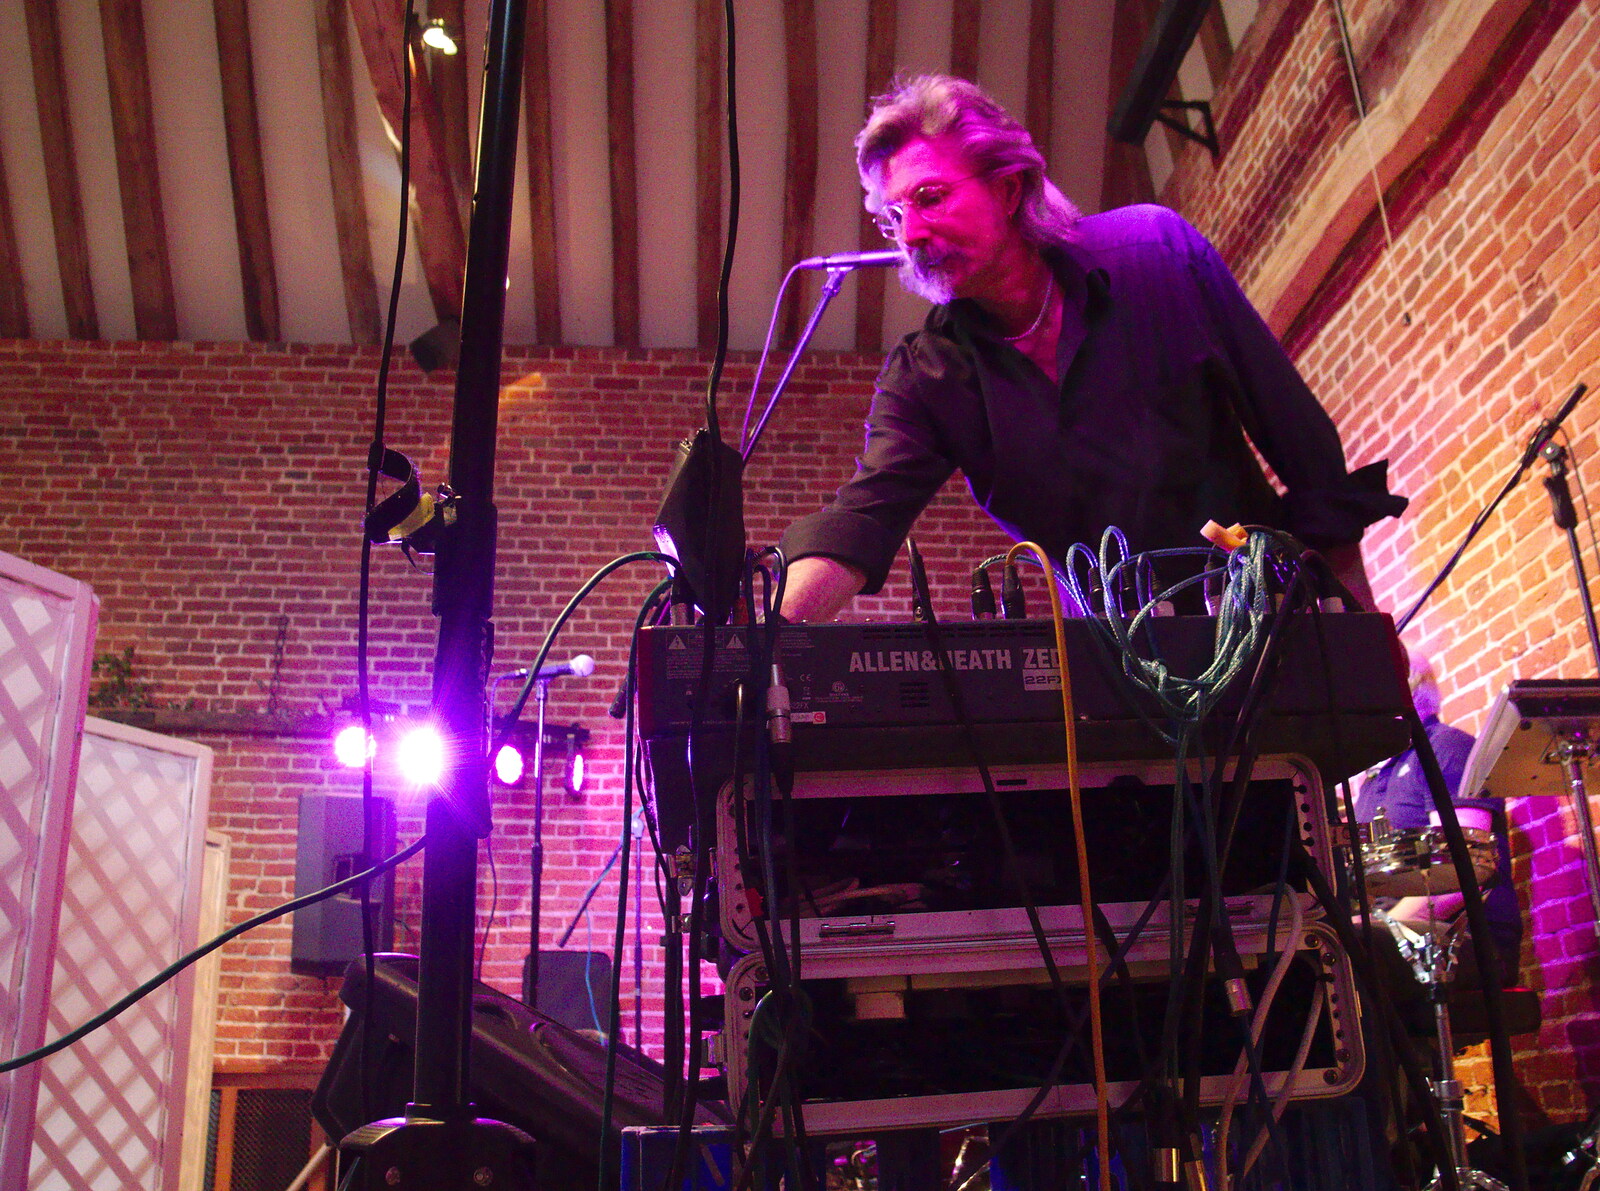 Rob twiddles knobs on the desk from The BBs Play Haughley Park Barn, Haughley, Suffolk - 26th April 2014